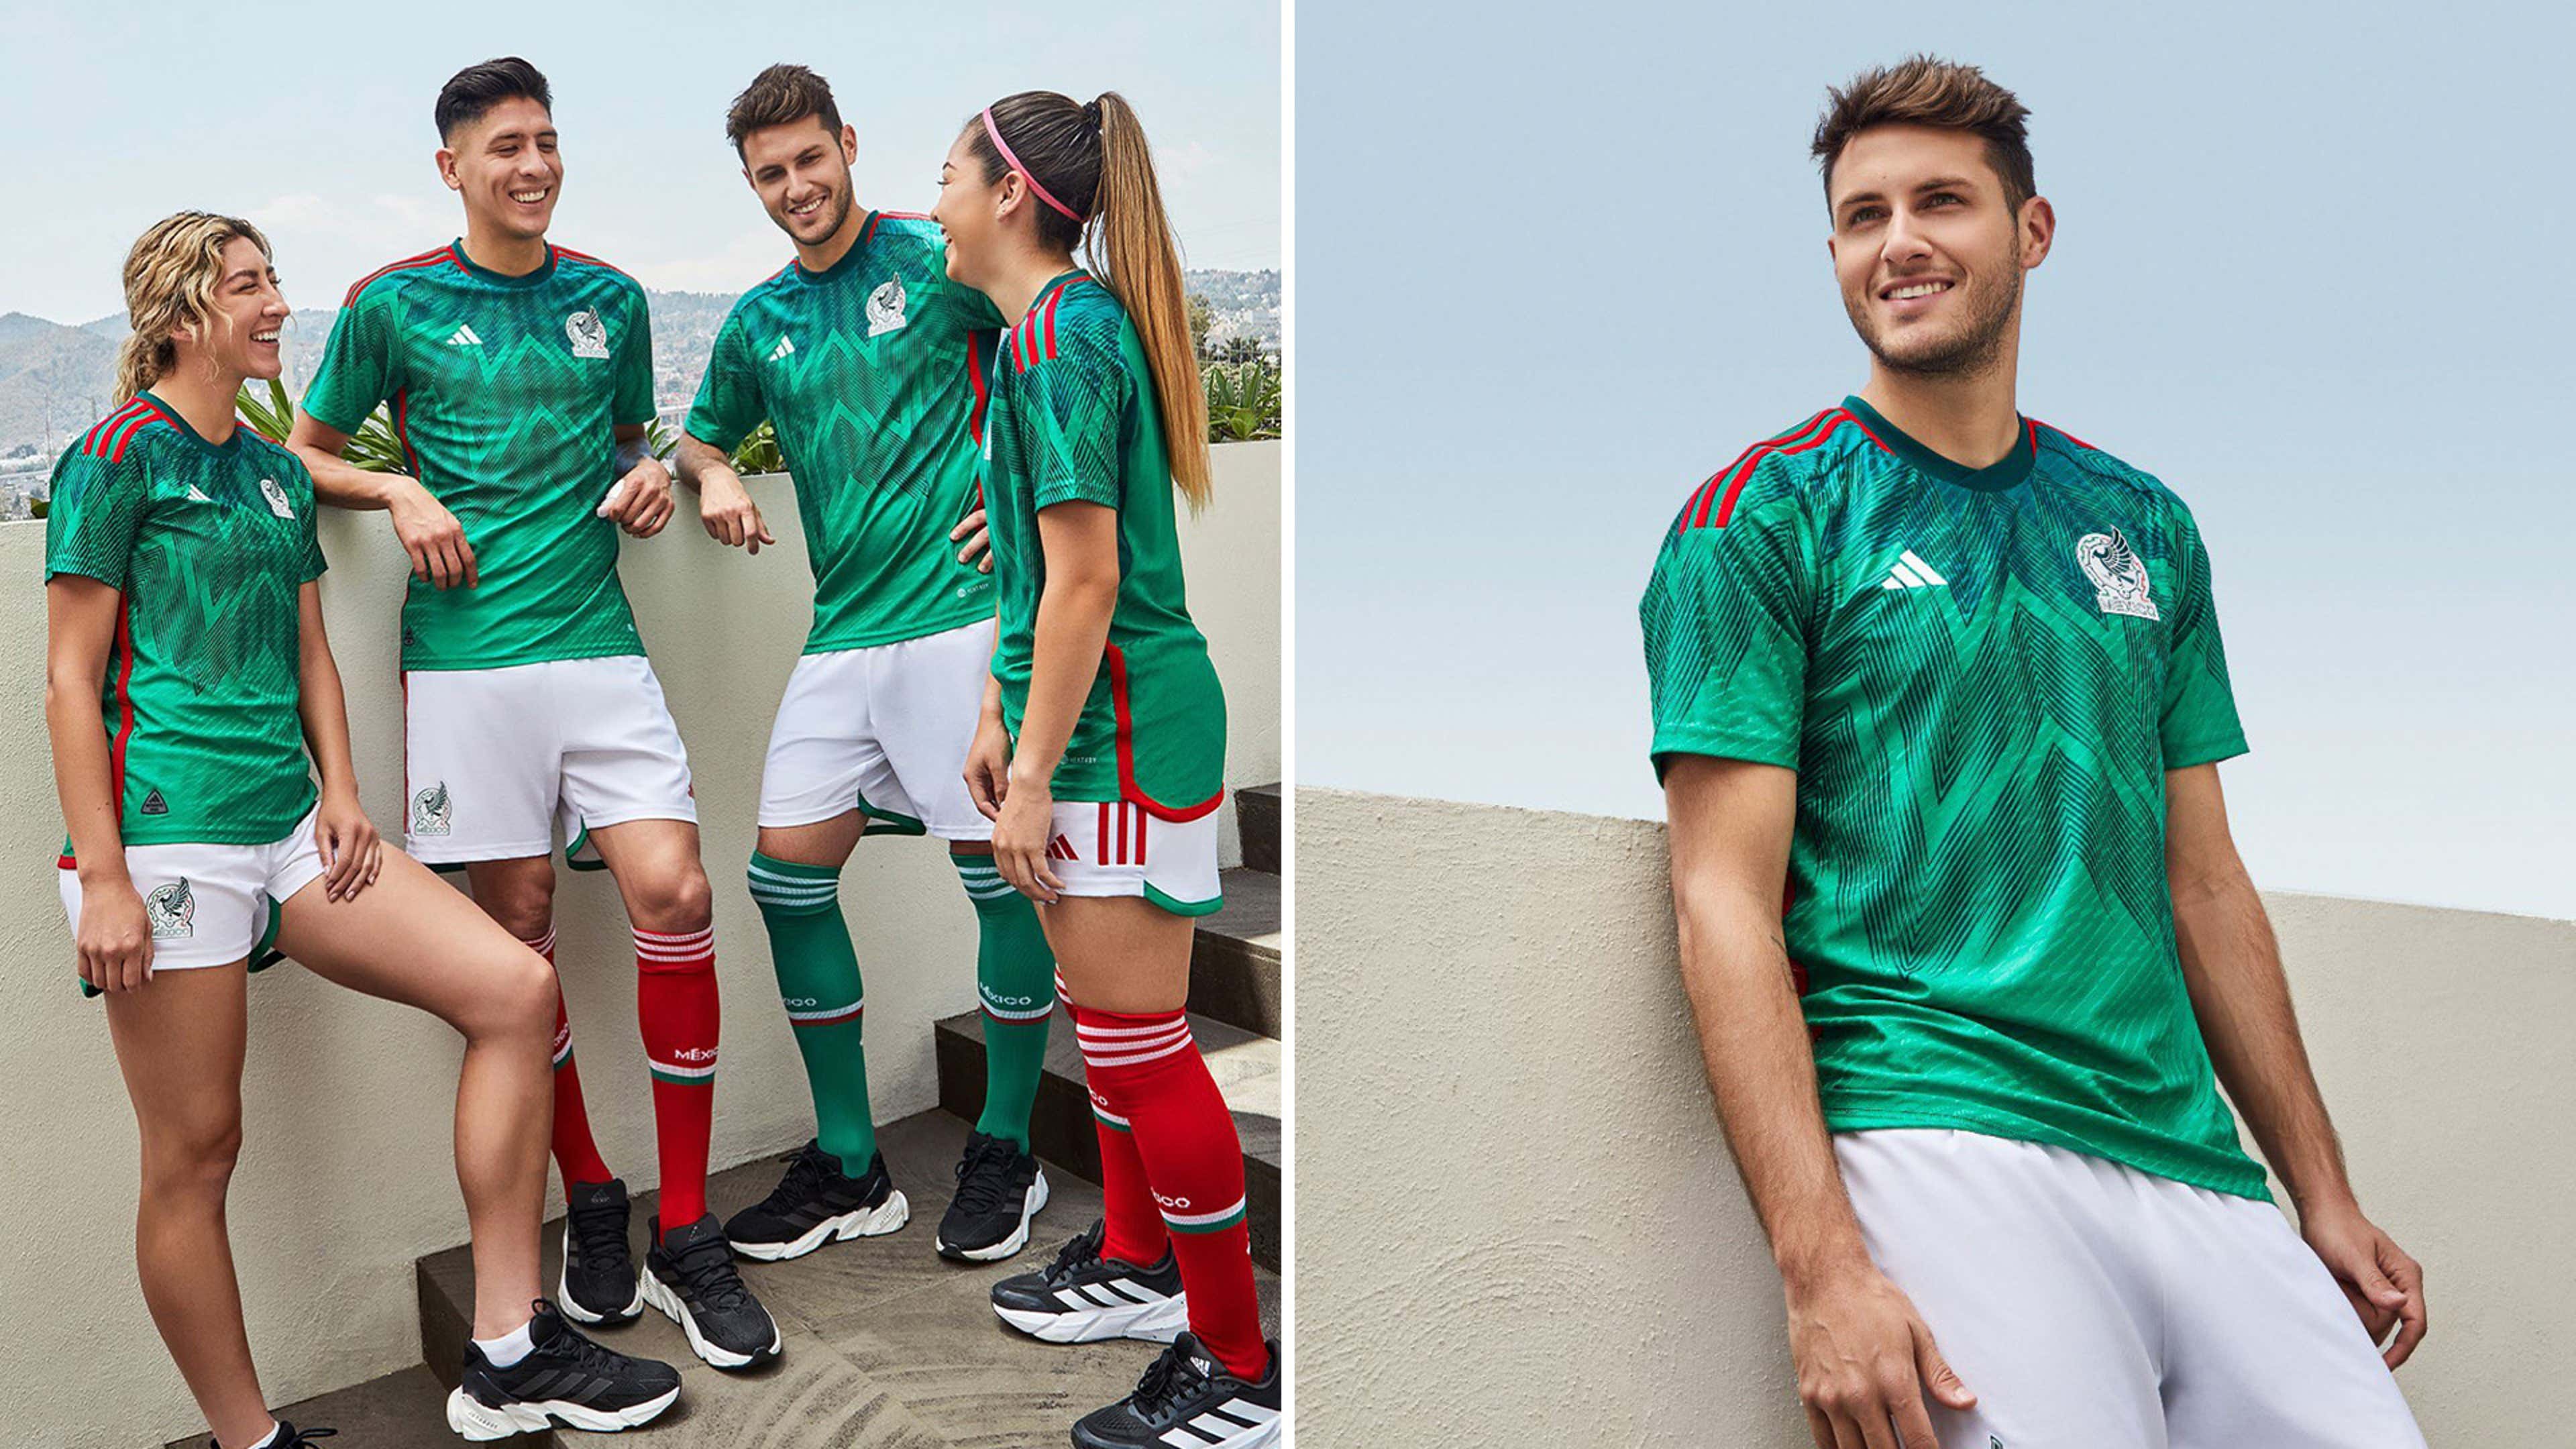 Adidas Men's Mexico 2022 Qatar World Cup Authentic Home Jersey